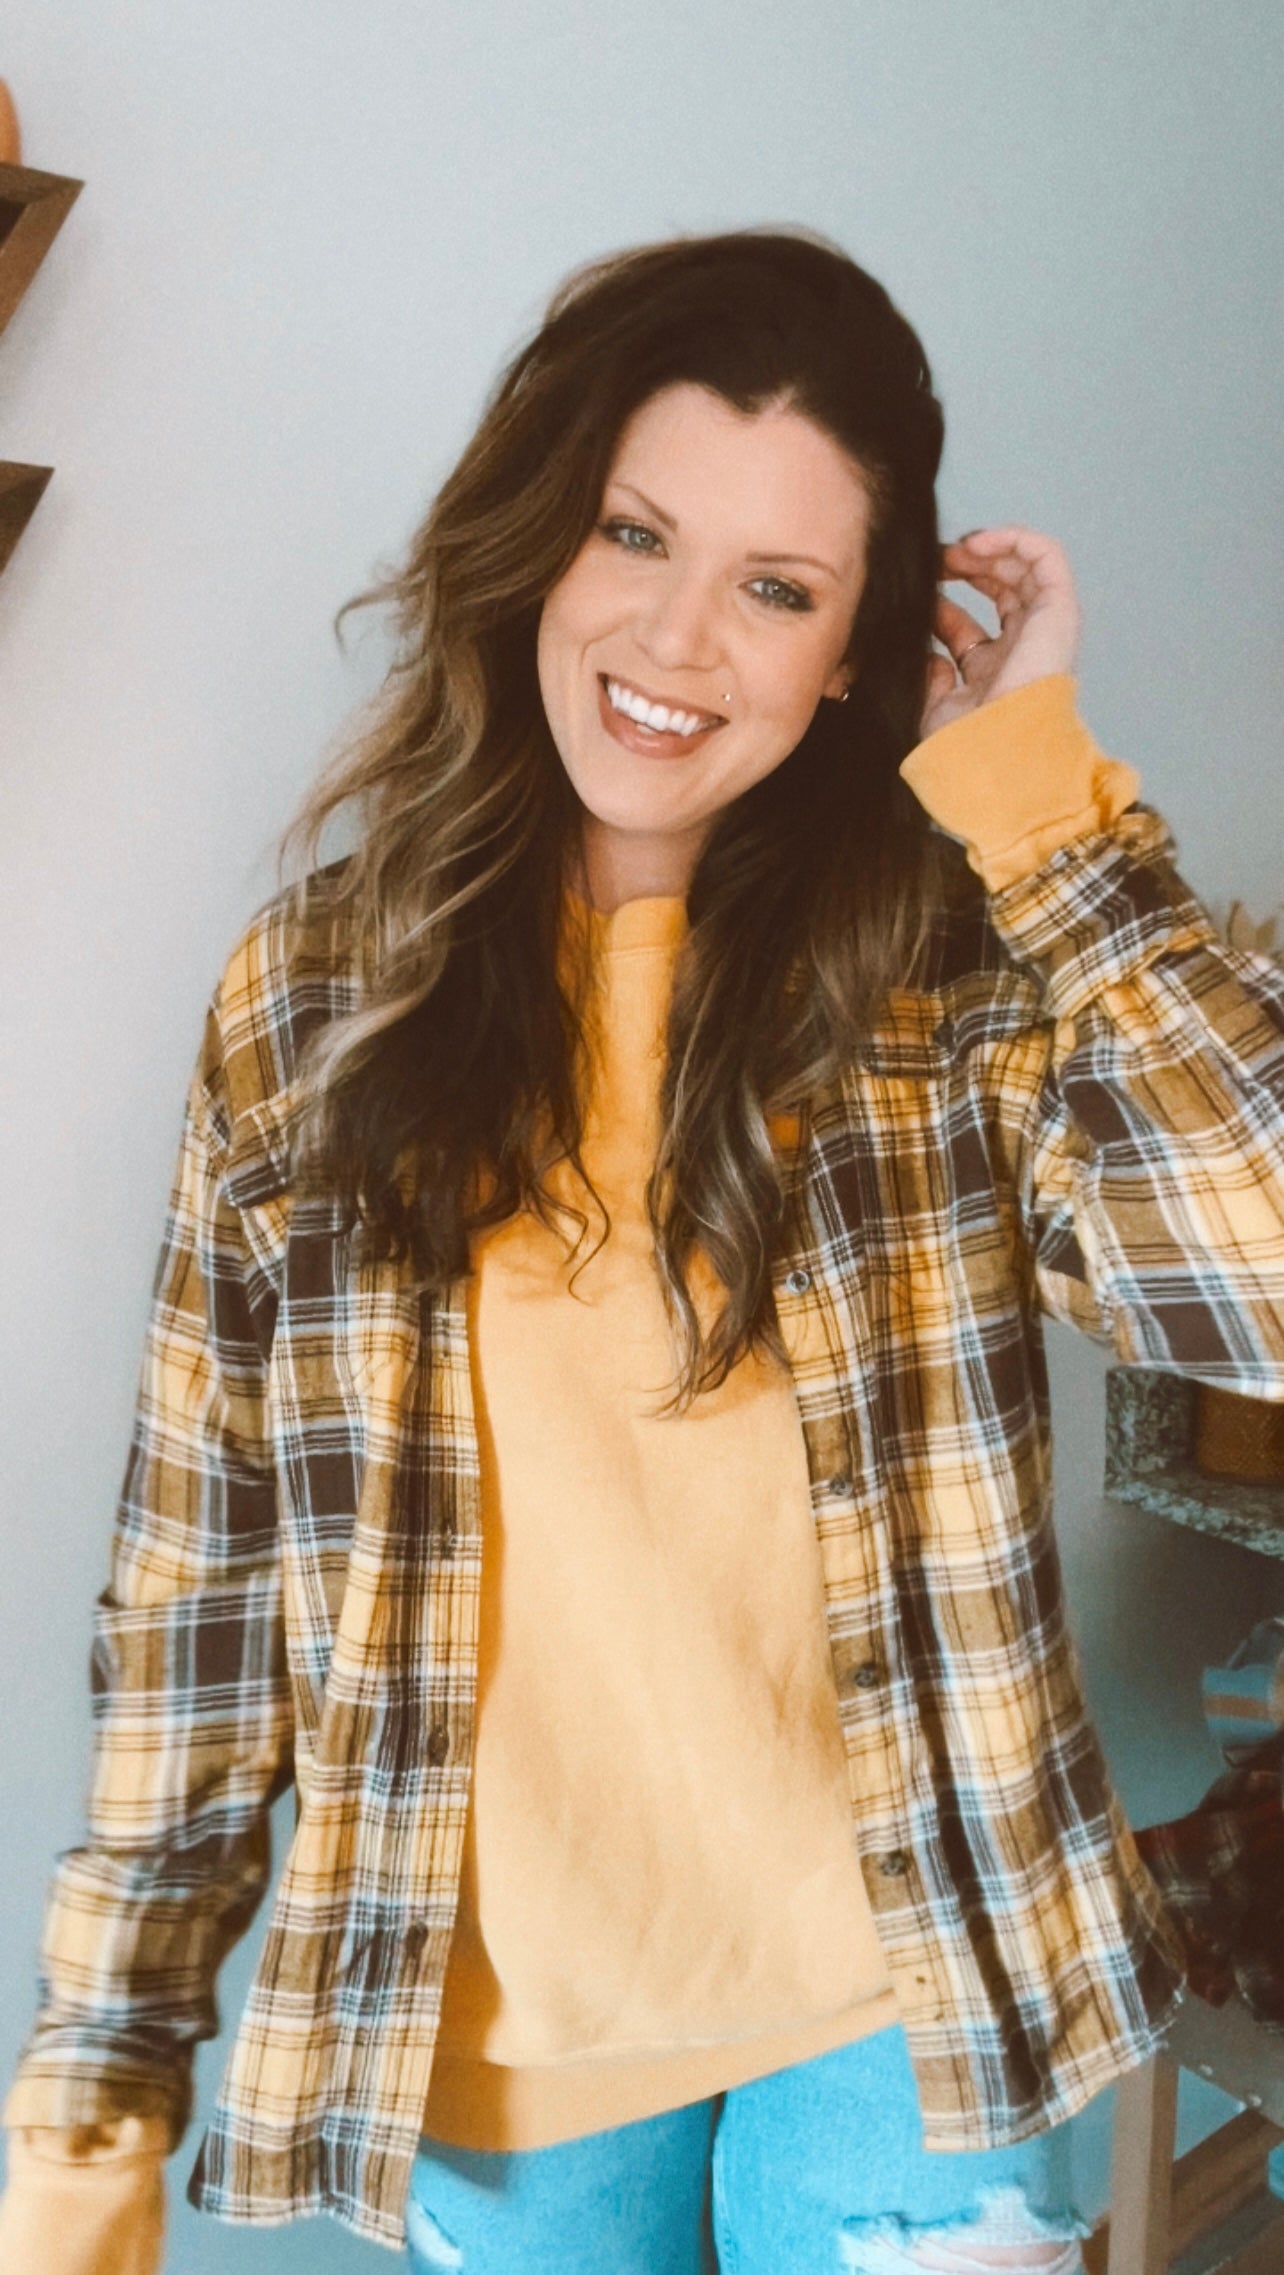 Yellow & Brown Flannel